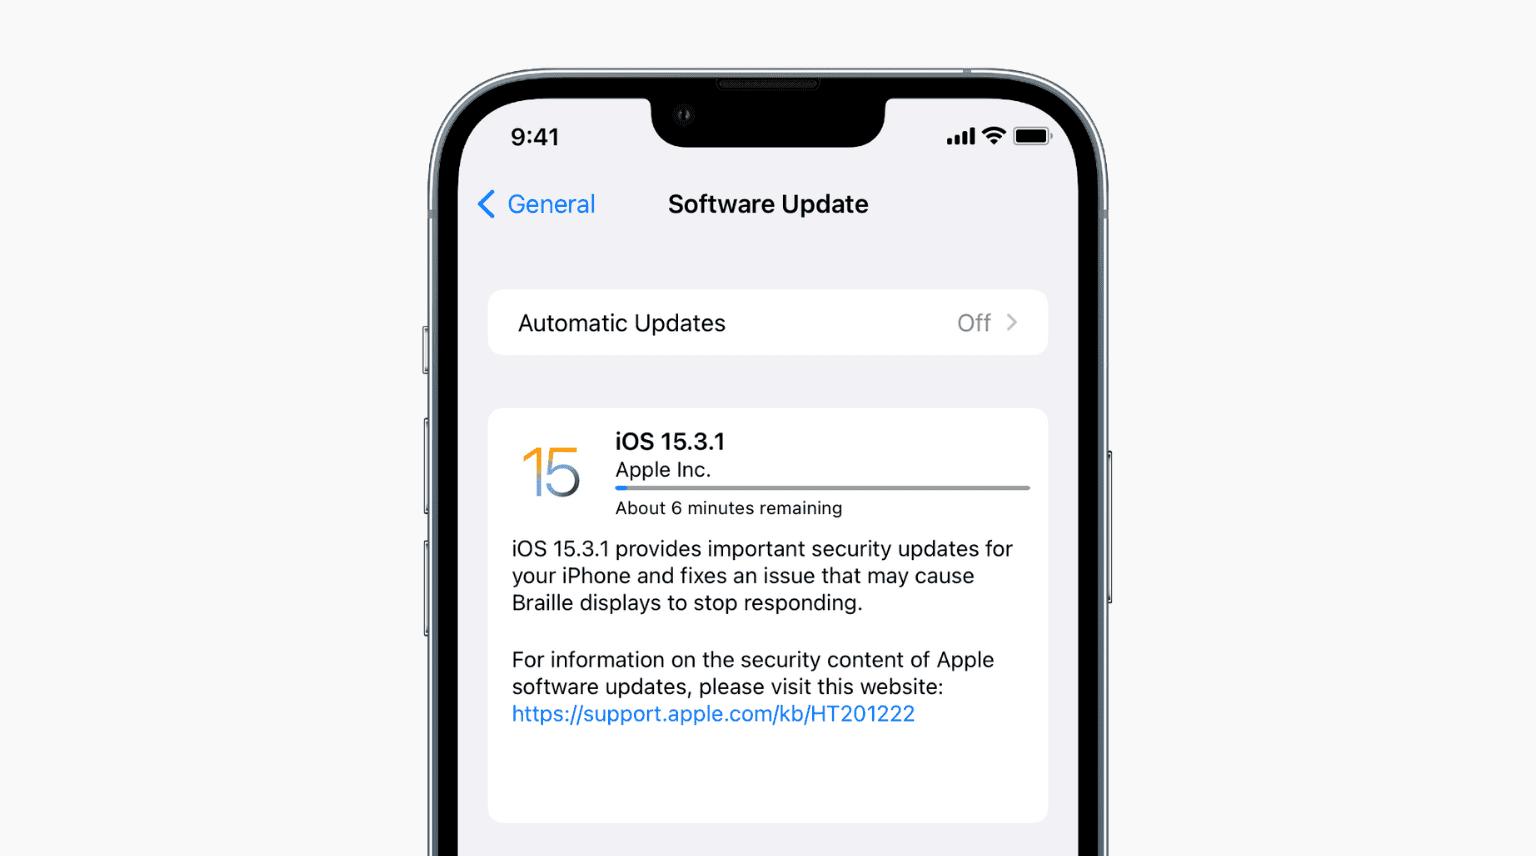 Select "Software Update".
If an update is available, tap on "Download and Install" and follow the on-screen instructions to update your iPhone.